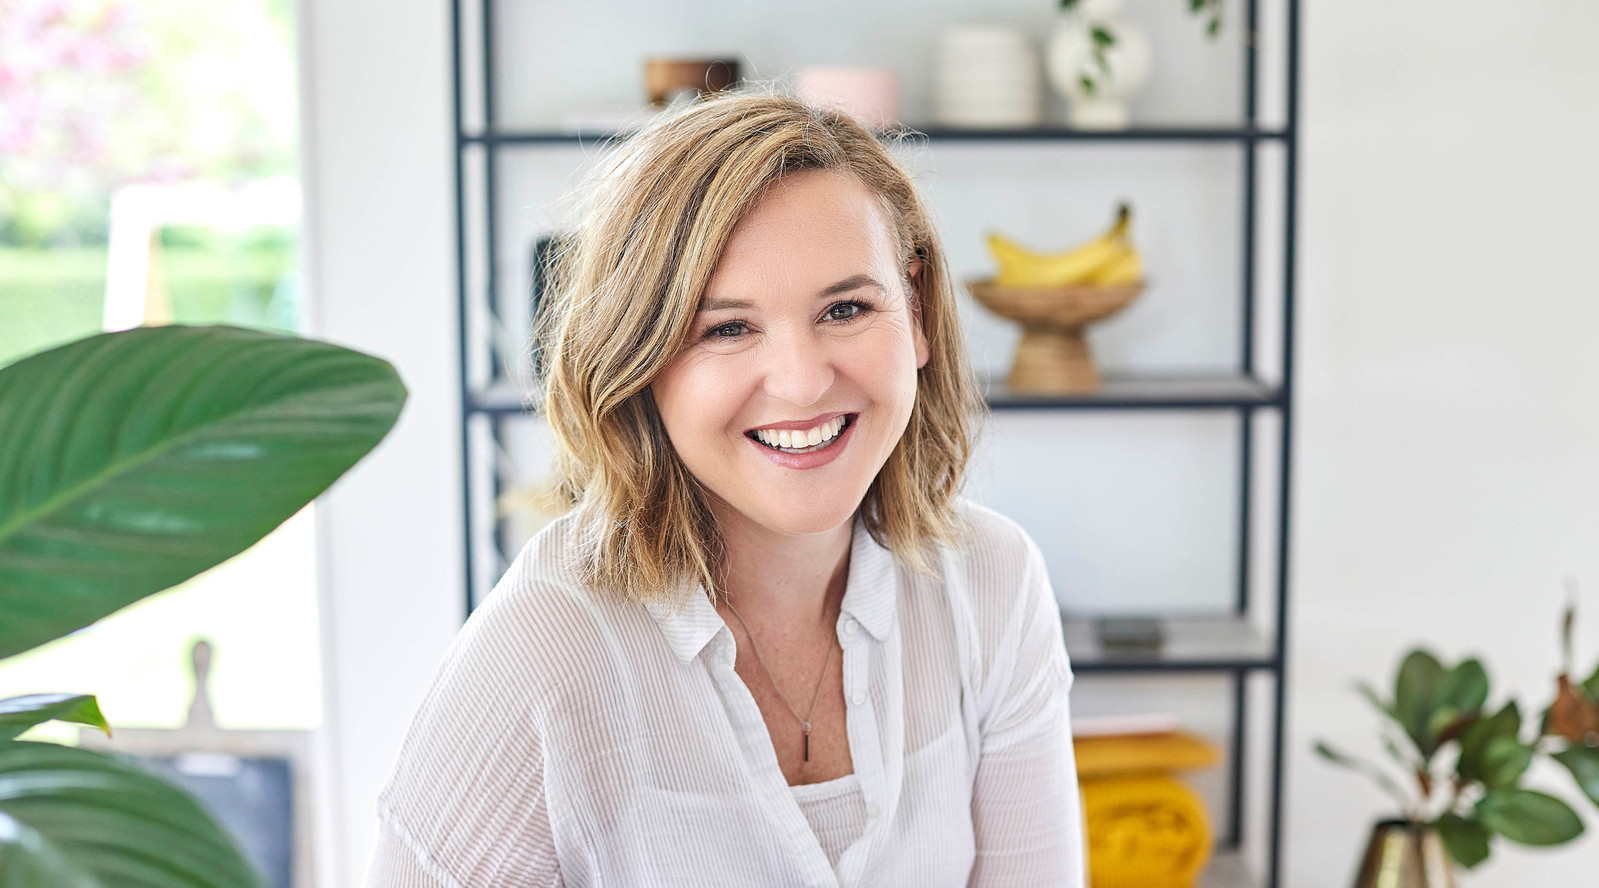 personal branding commercial image of women smiling at camera with plant and bookshelf in background; headshot